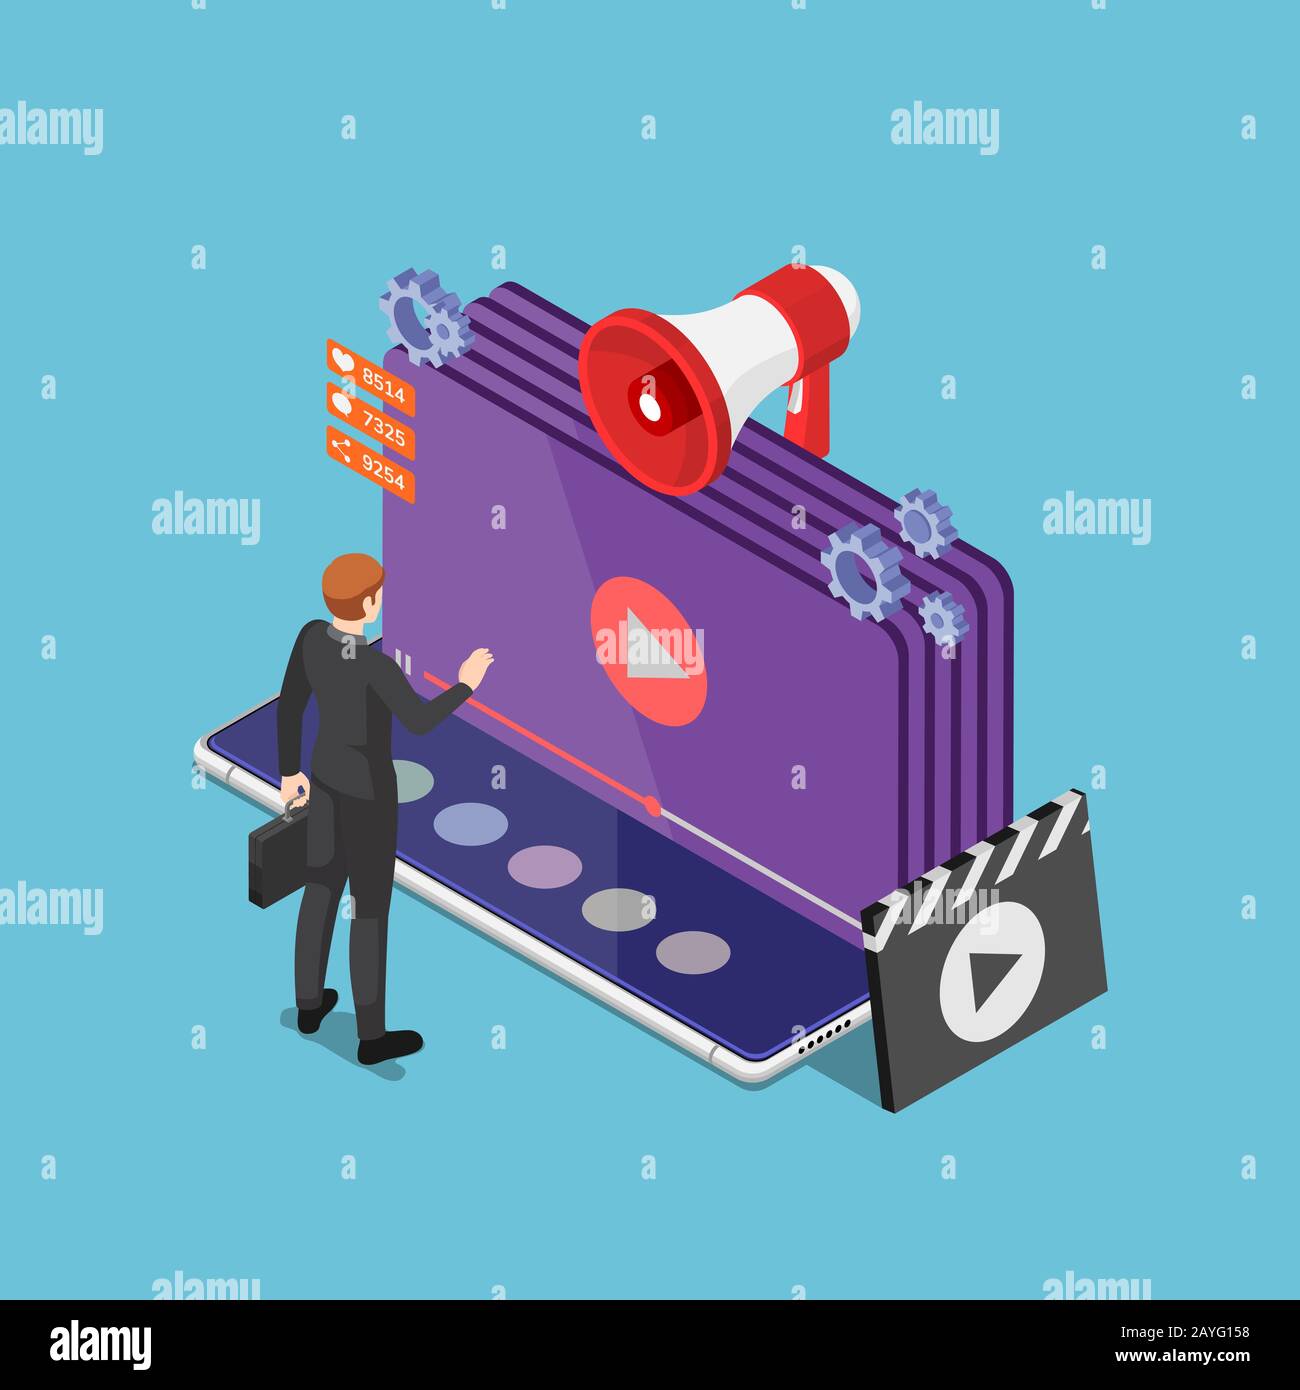 Flat 3d isometric businessman play online video streaming on smartphone. Video content marketing and movie streaming service concept. Stock Vector